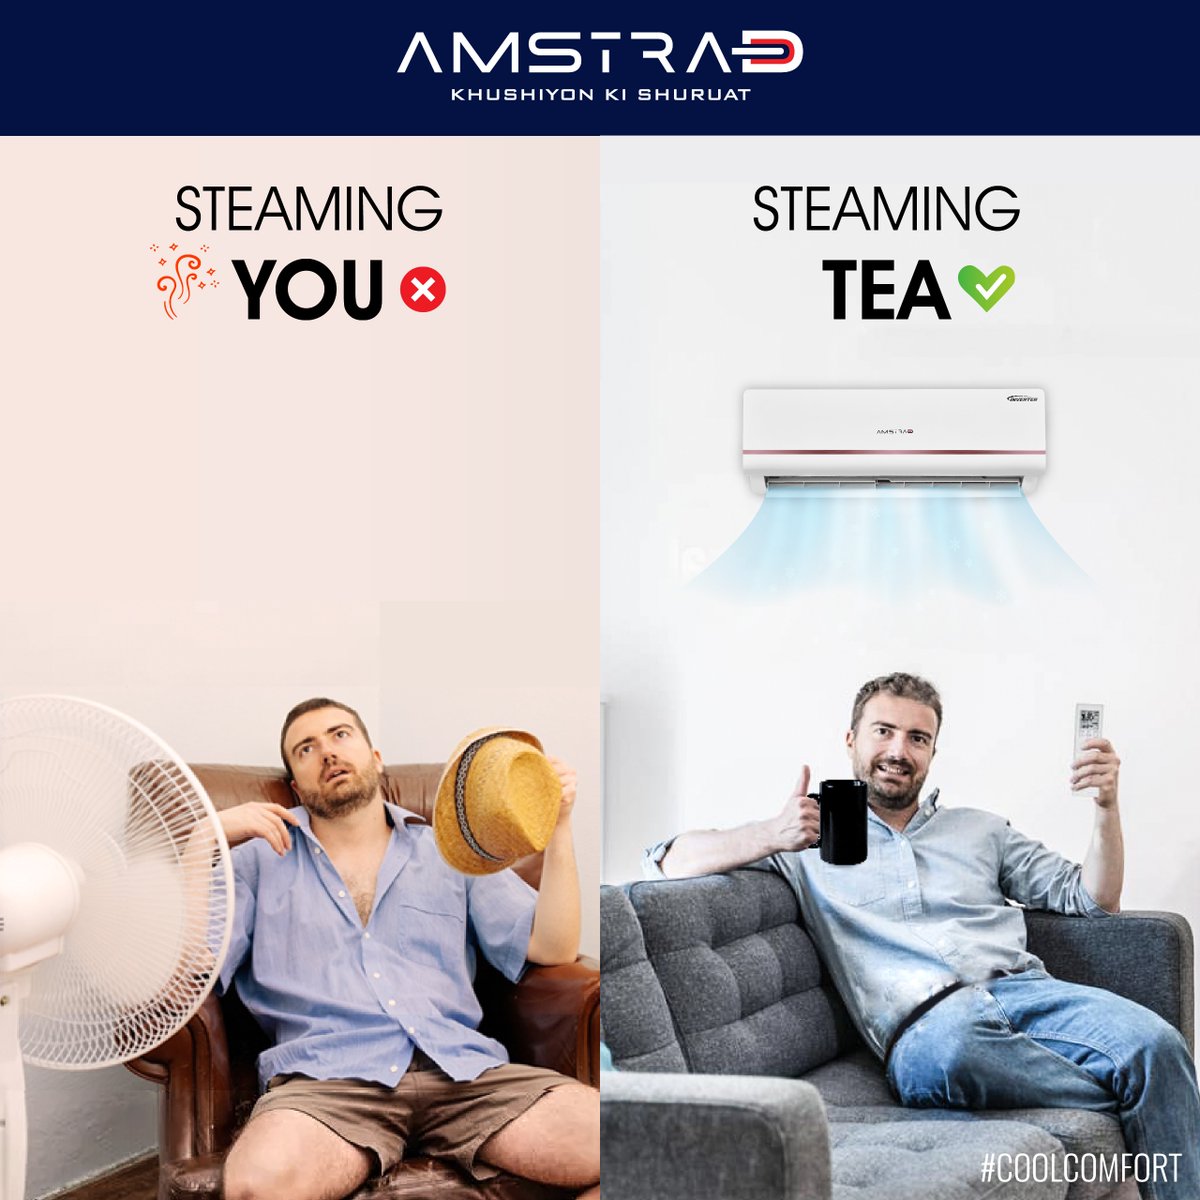 Beat the heat, not your cuppa! Enjoy steaming tea & cool comfort with Amstrad AC. #Amstrad #AmstradAC #AirConditioner #SummerCoolBrew